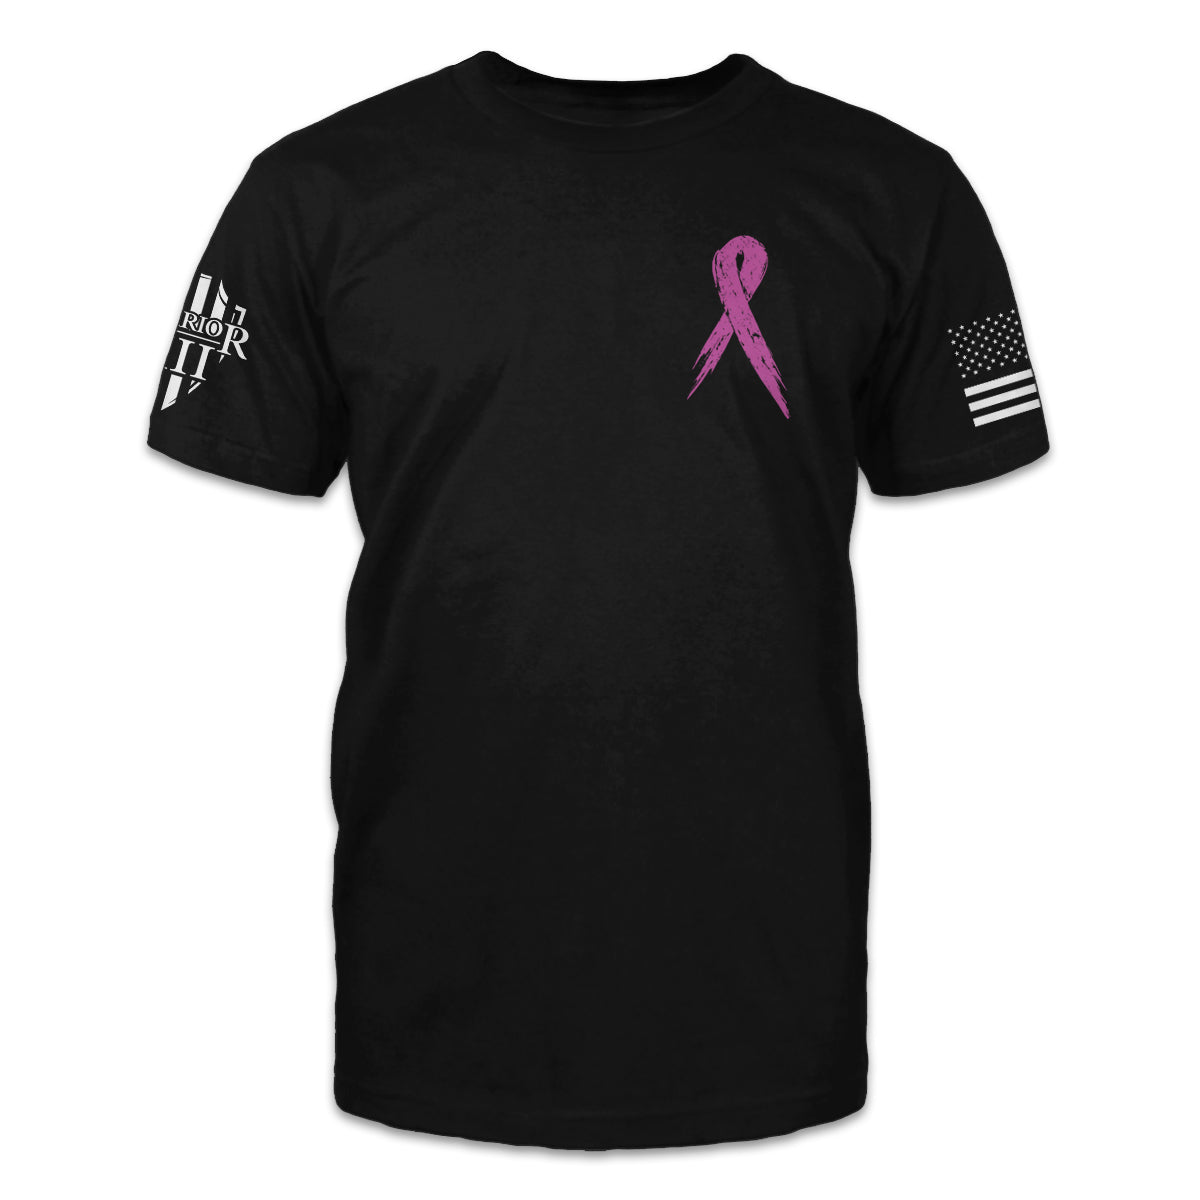 Men's black t-shirt with the pink ribbon for breast cancer awareness.